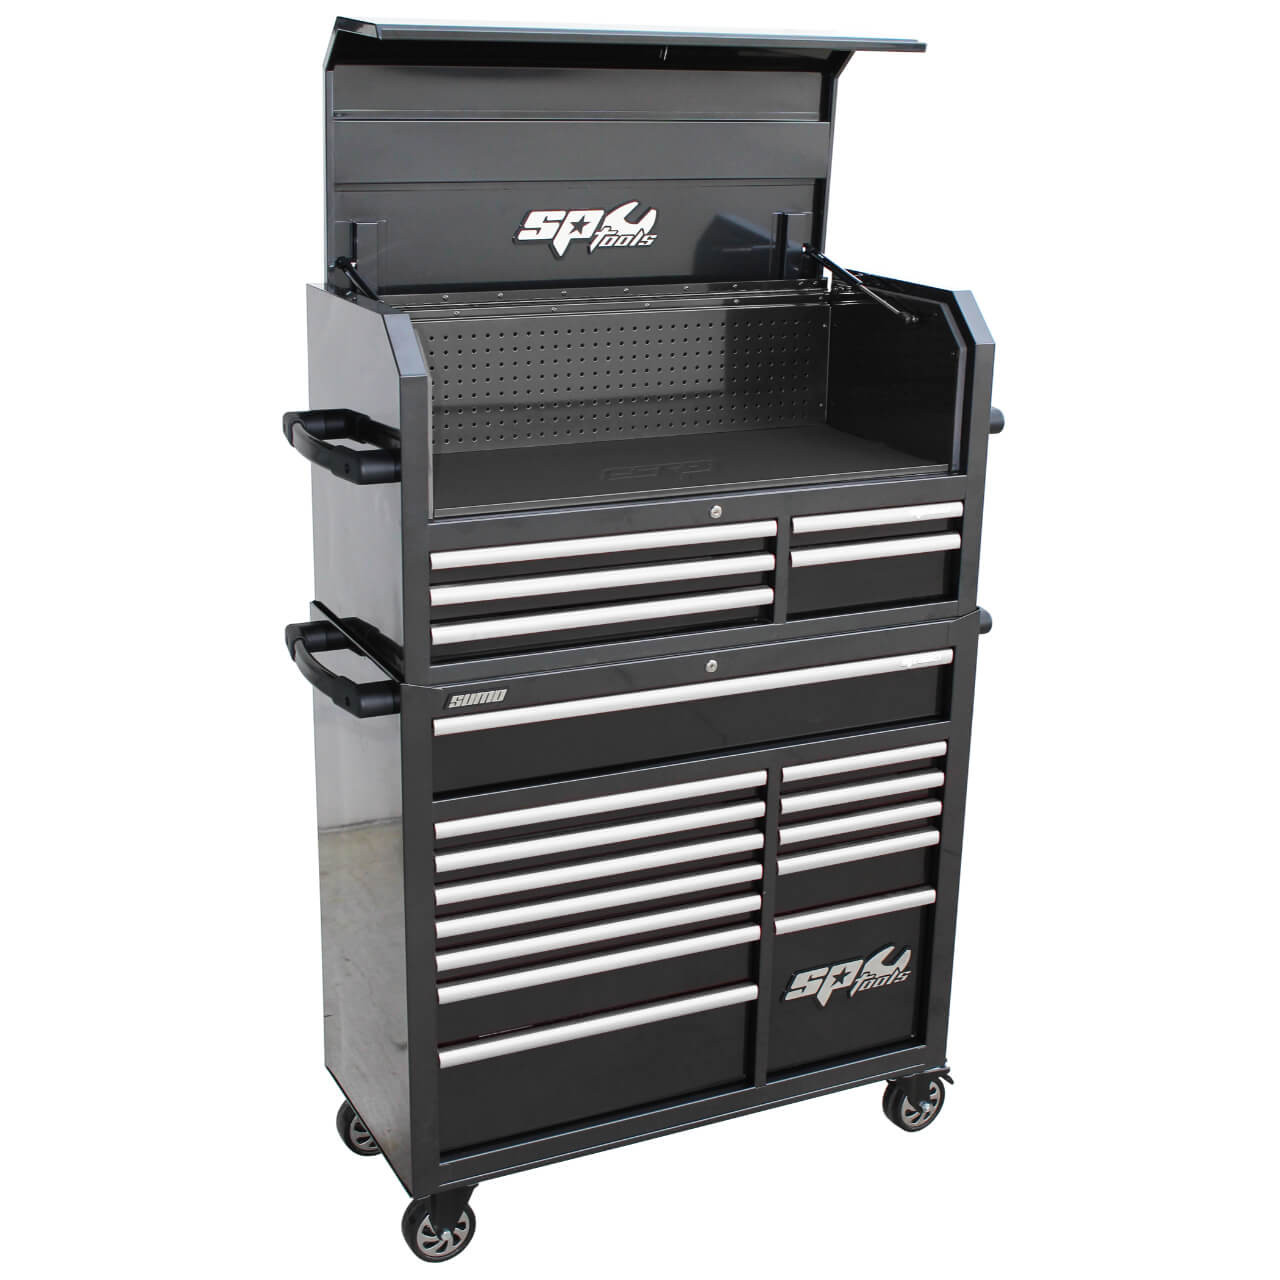 SP Tools 18 Drawer Sumo Series Power Hutch Roller Cabinet Combination Black Chrome